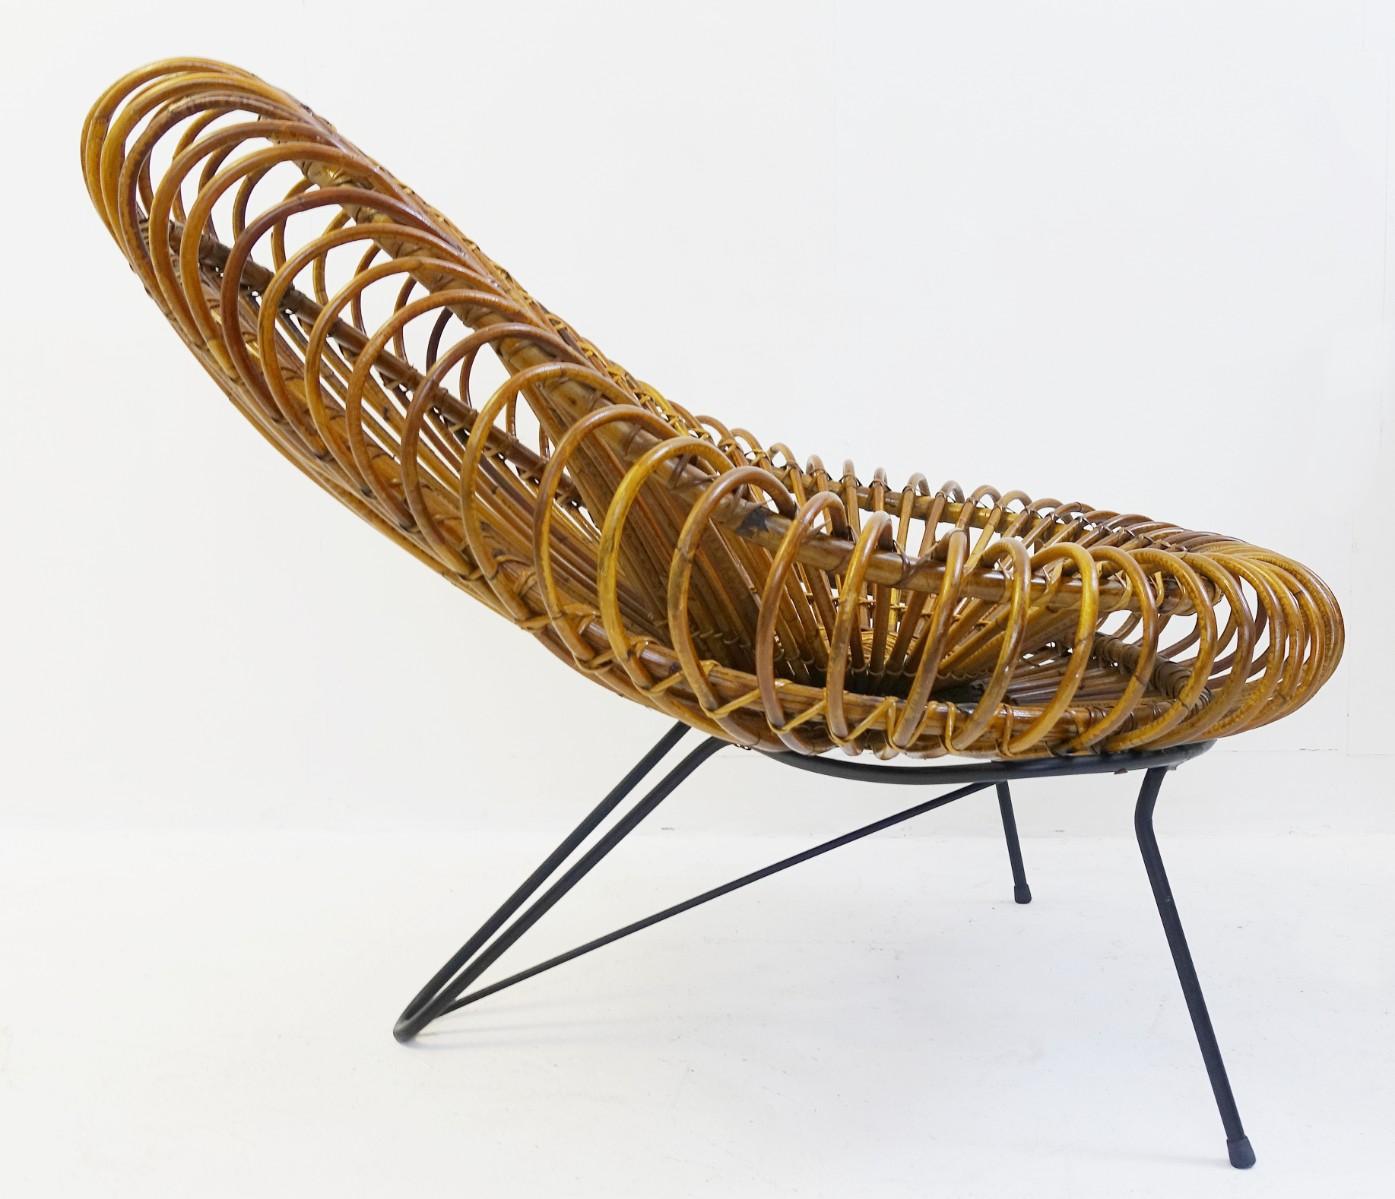 Rattan Pair of chair by Janine Abraham & Dirk Jan Rol for Edition Rougier, 1950s